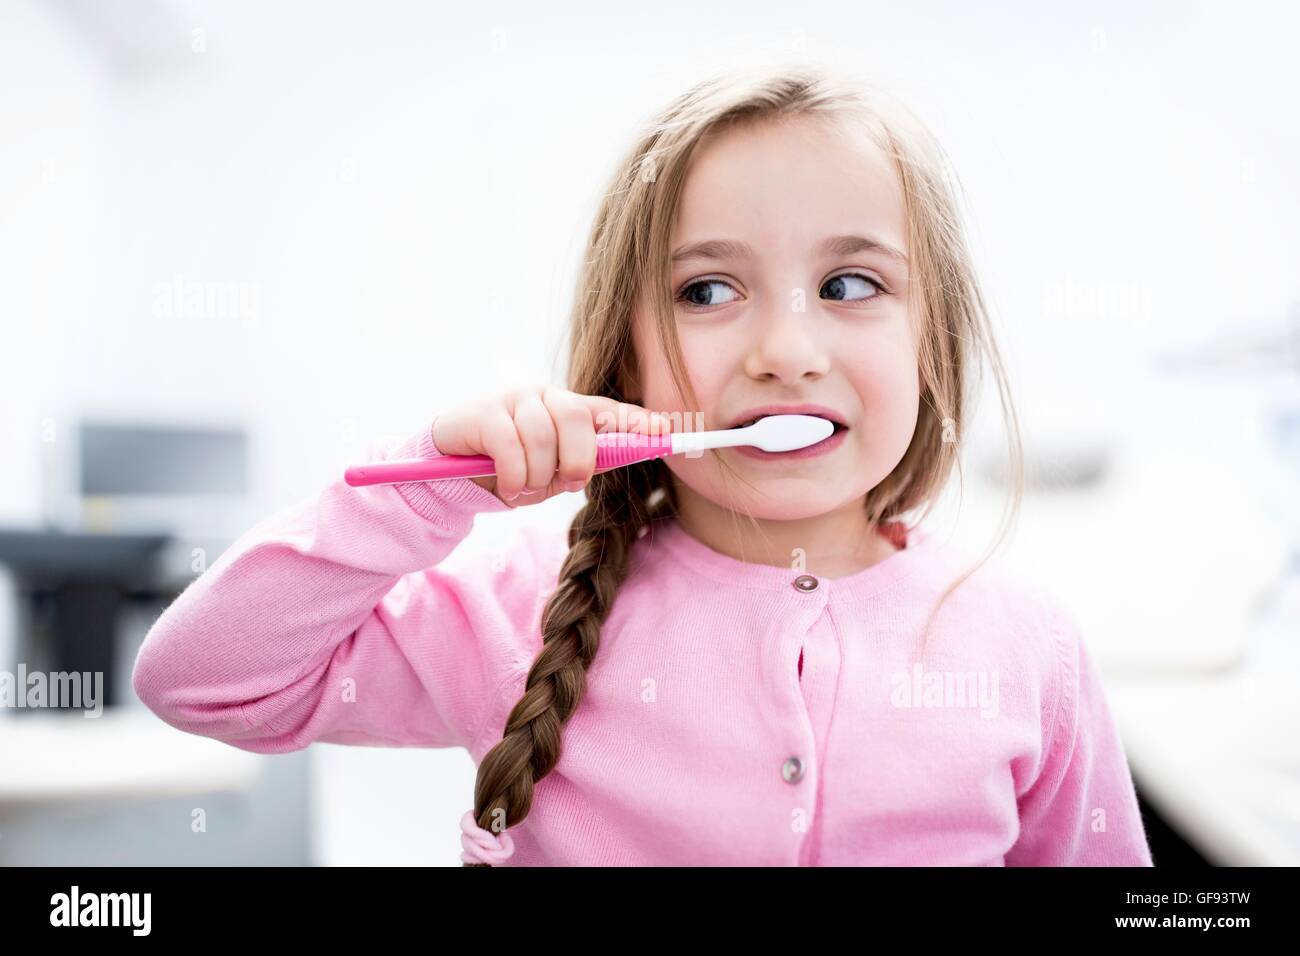 MODEL RELEASED. Girl brushing teeth, close-up. Stock Photo